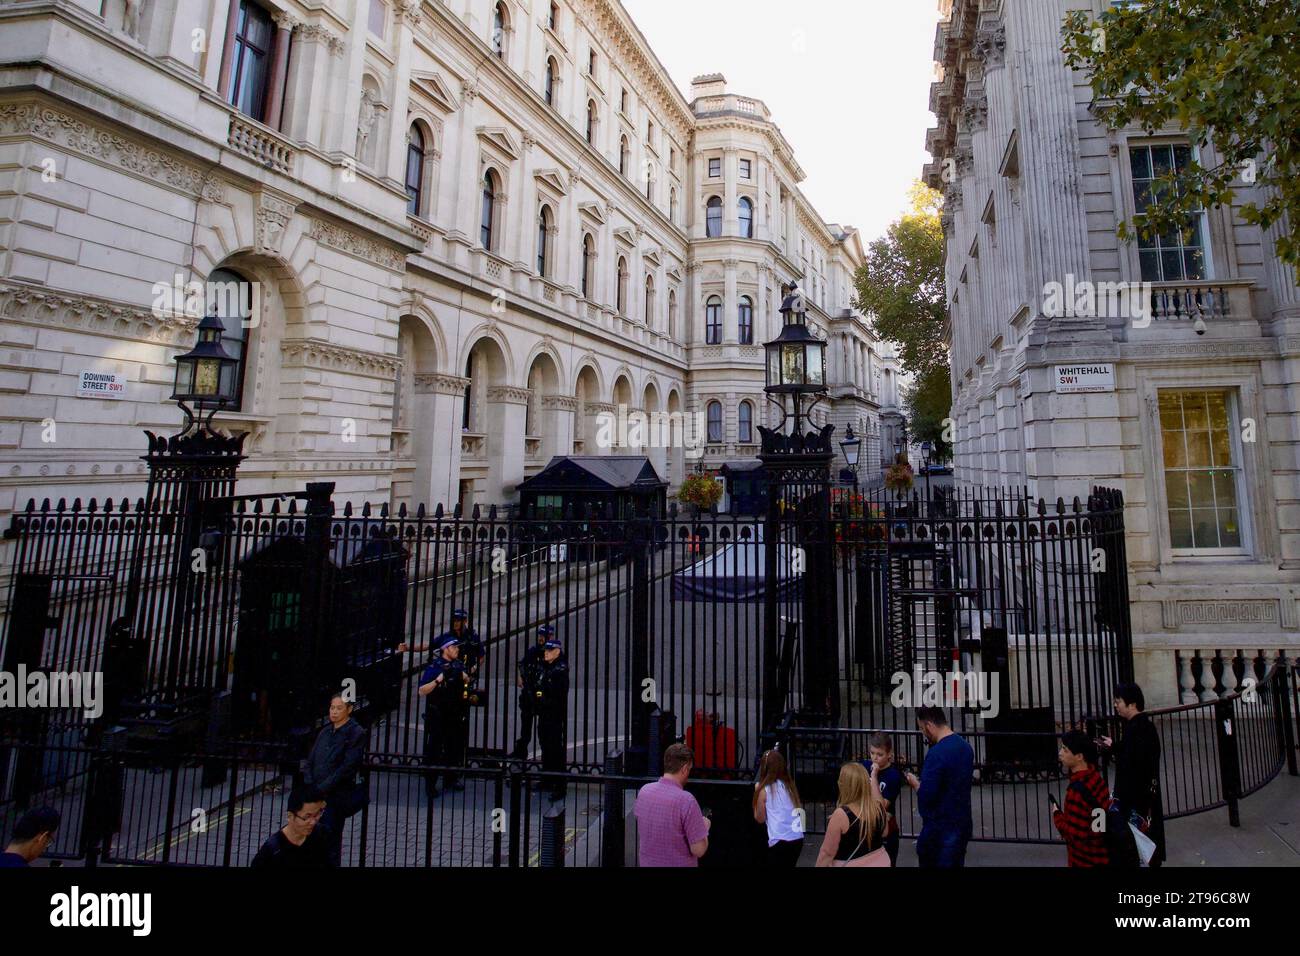 Downing Street, City of Westminster, Westminster, Londra. Foto Stock